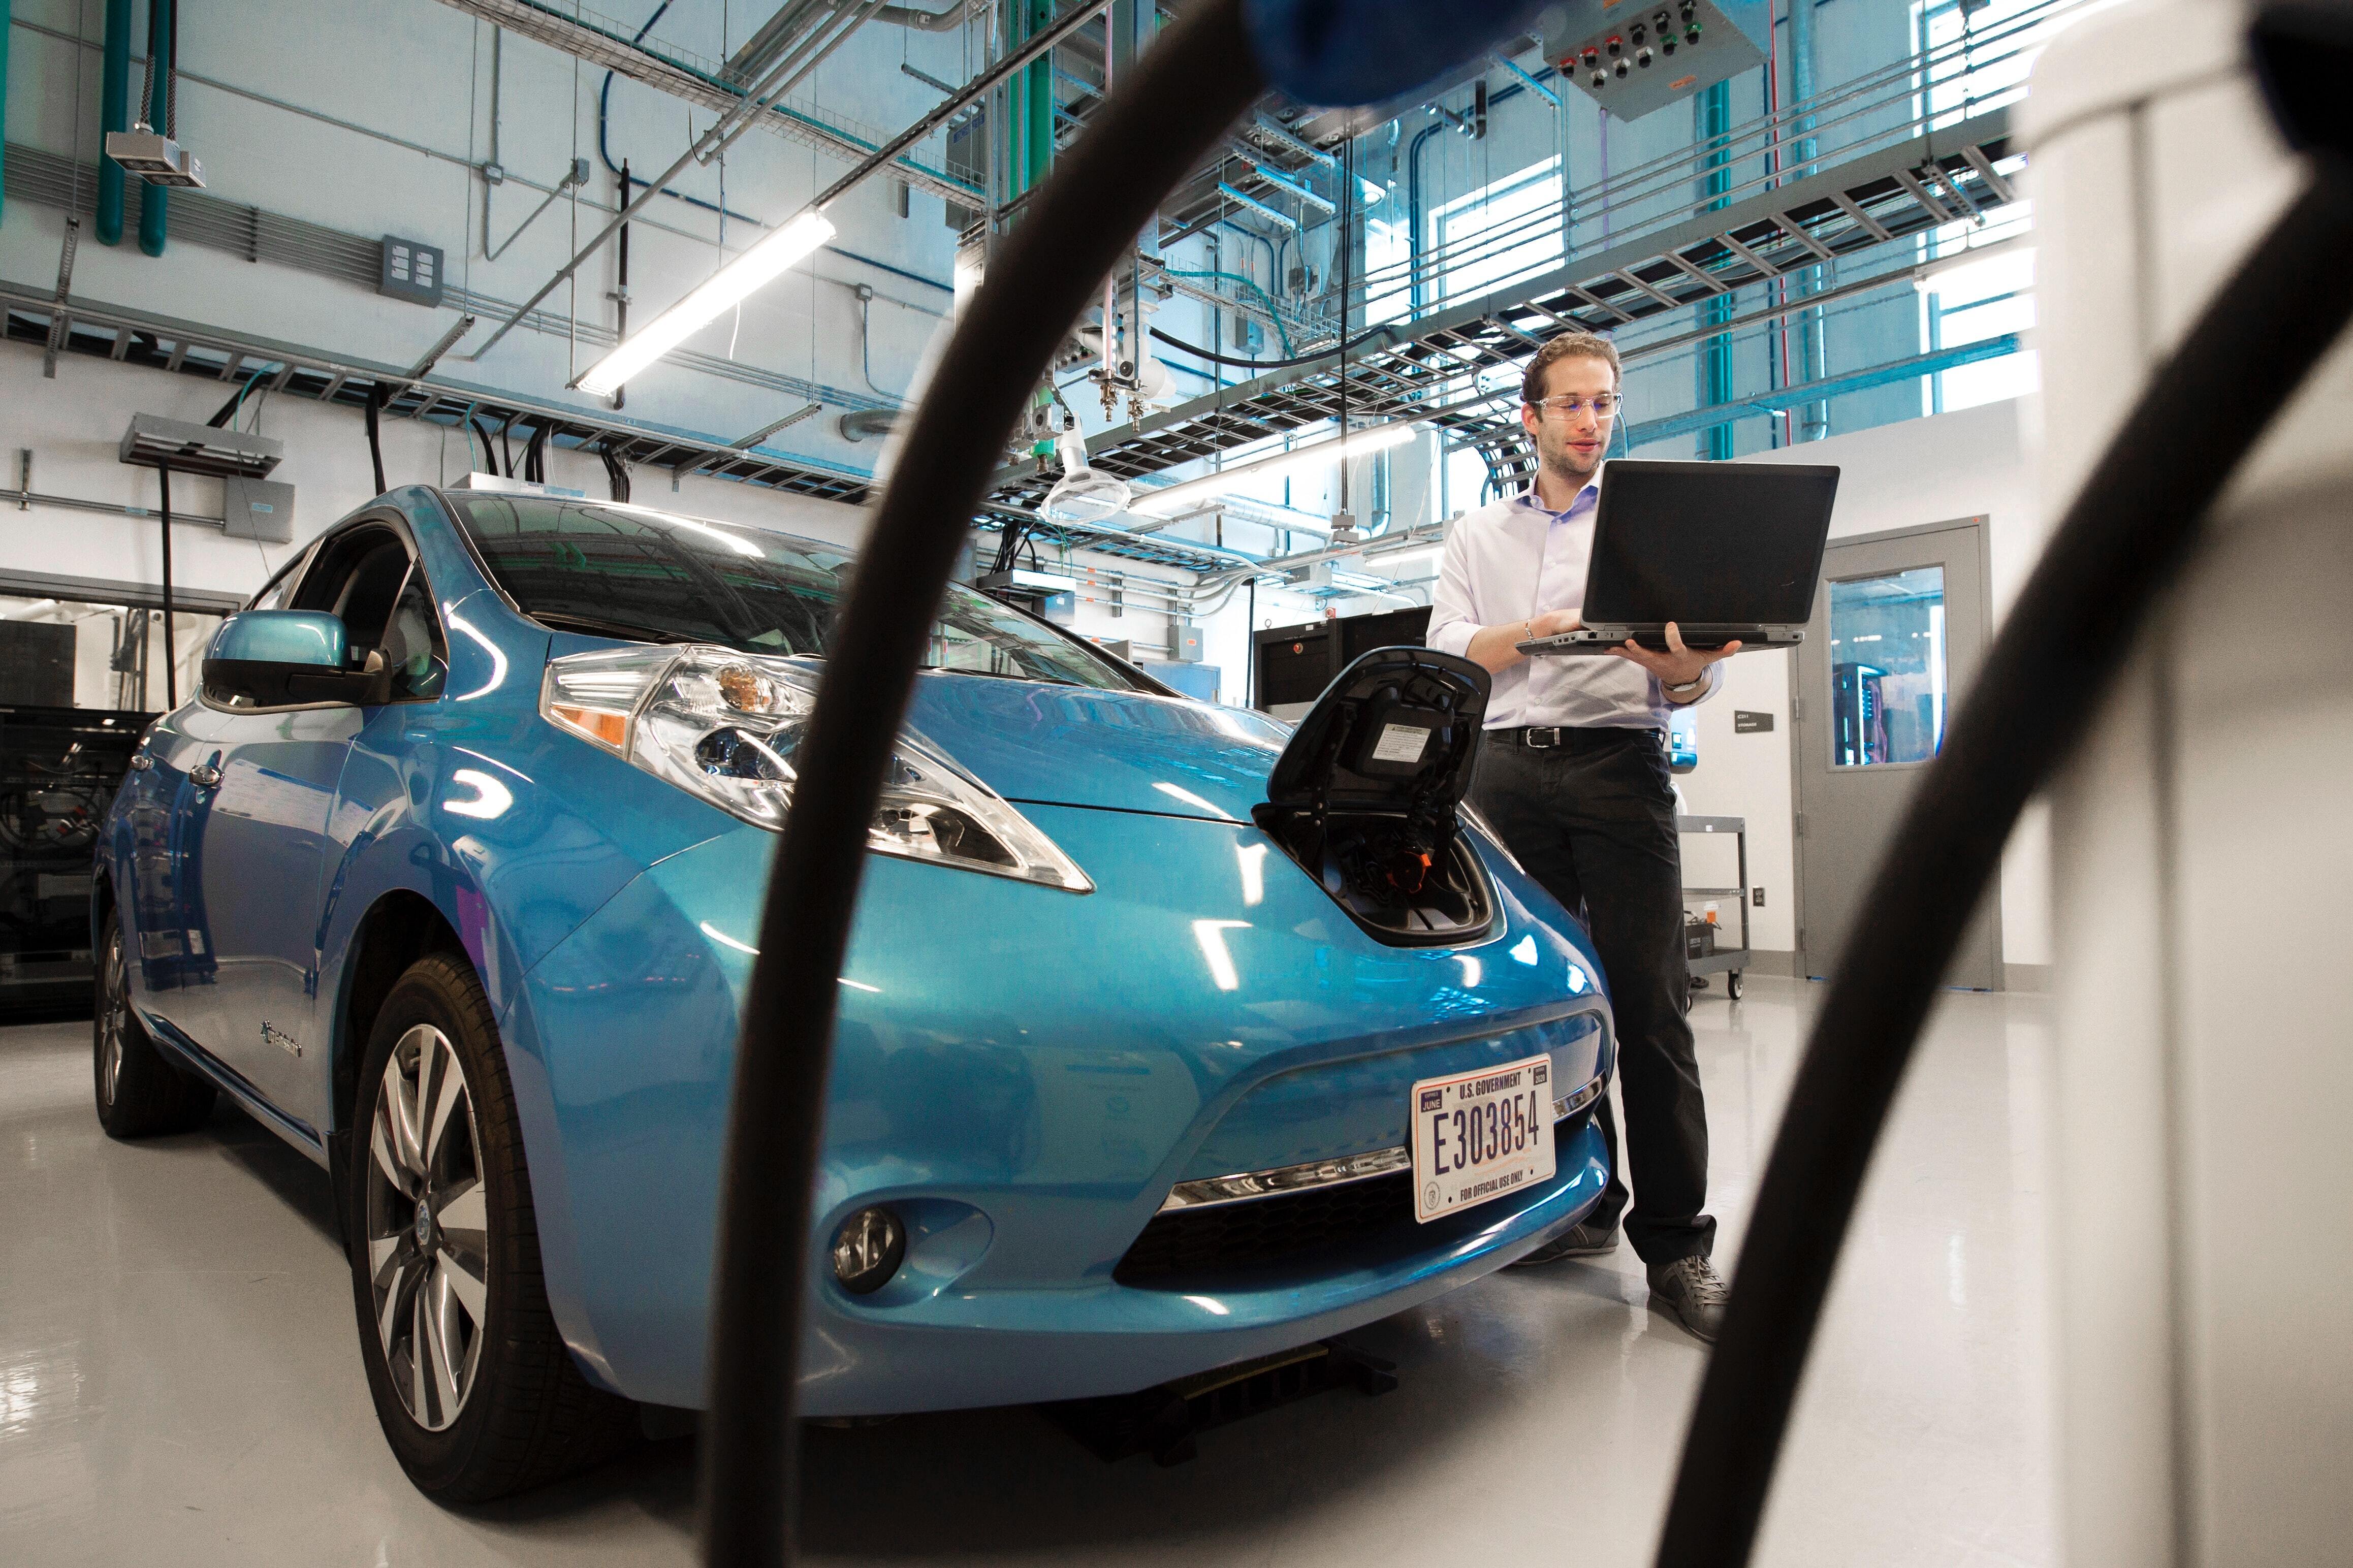 A man holding a laptop next to an EV, seemingly checking the status of the battery